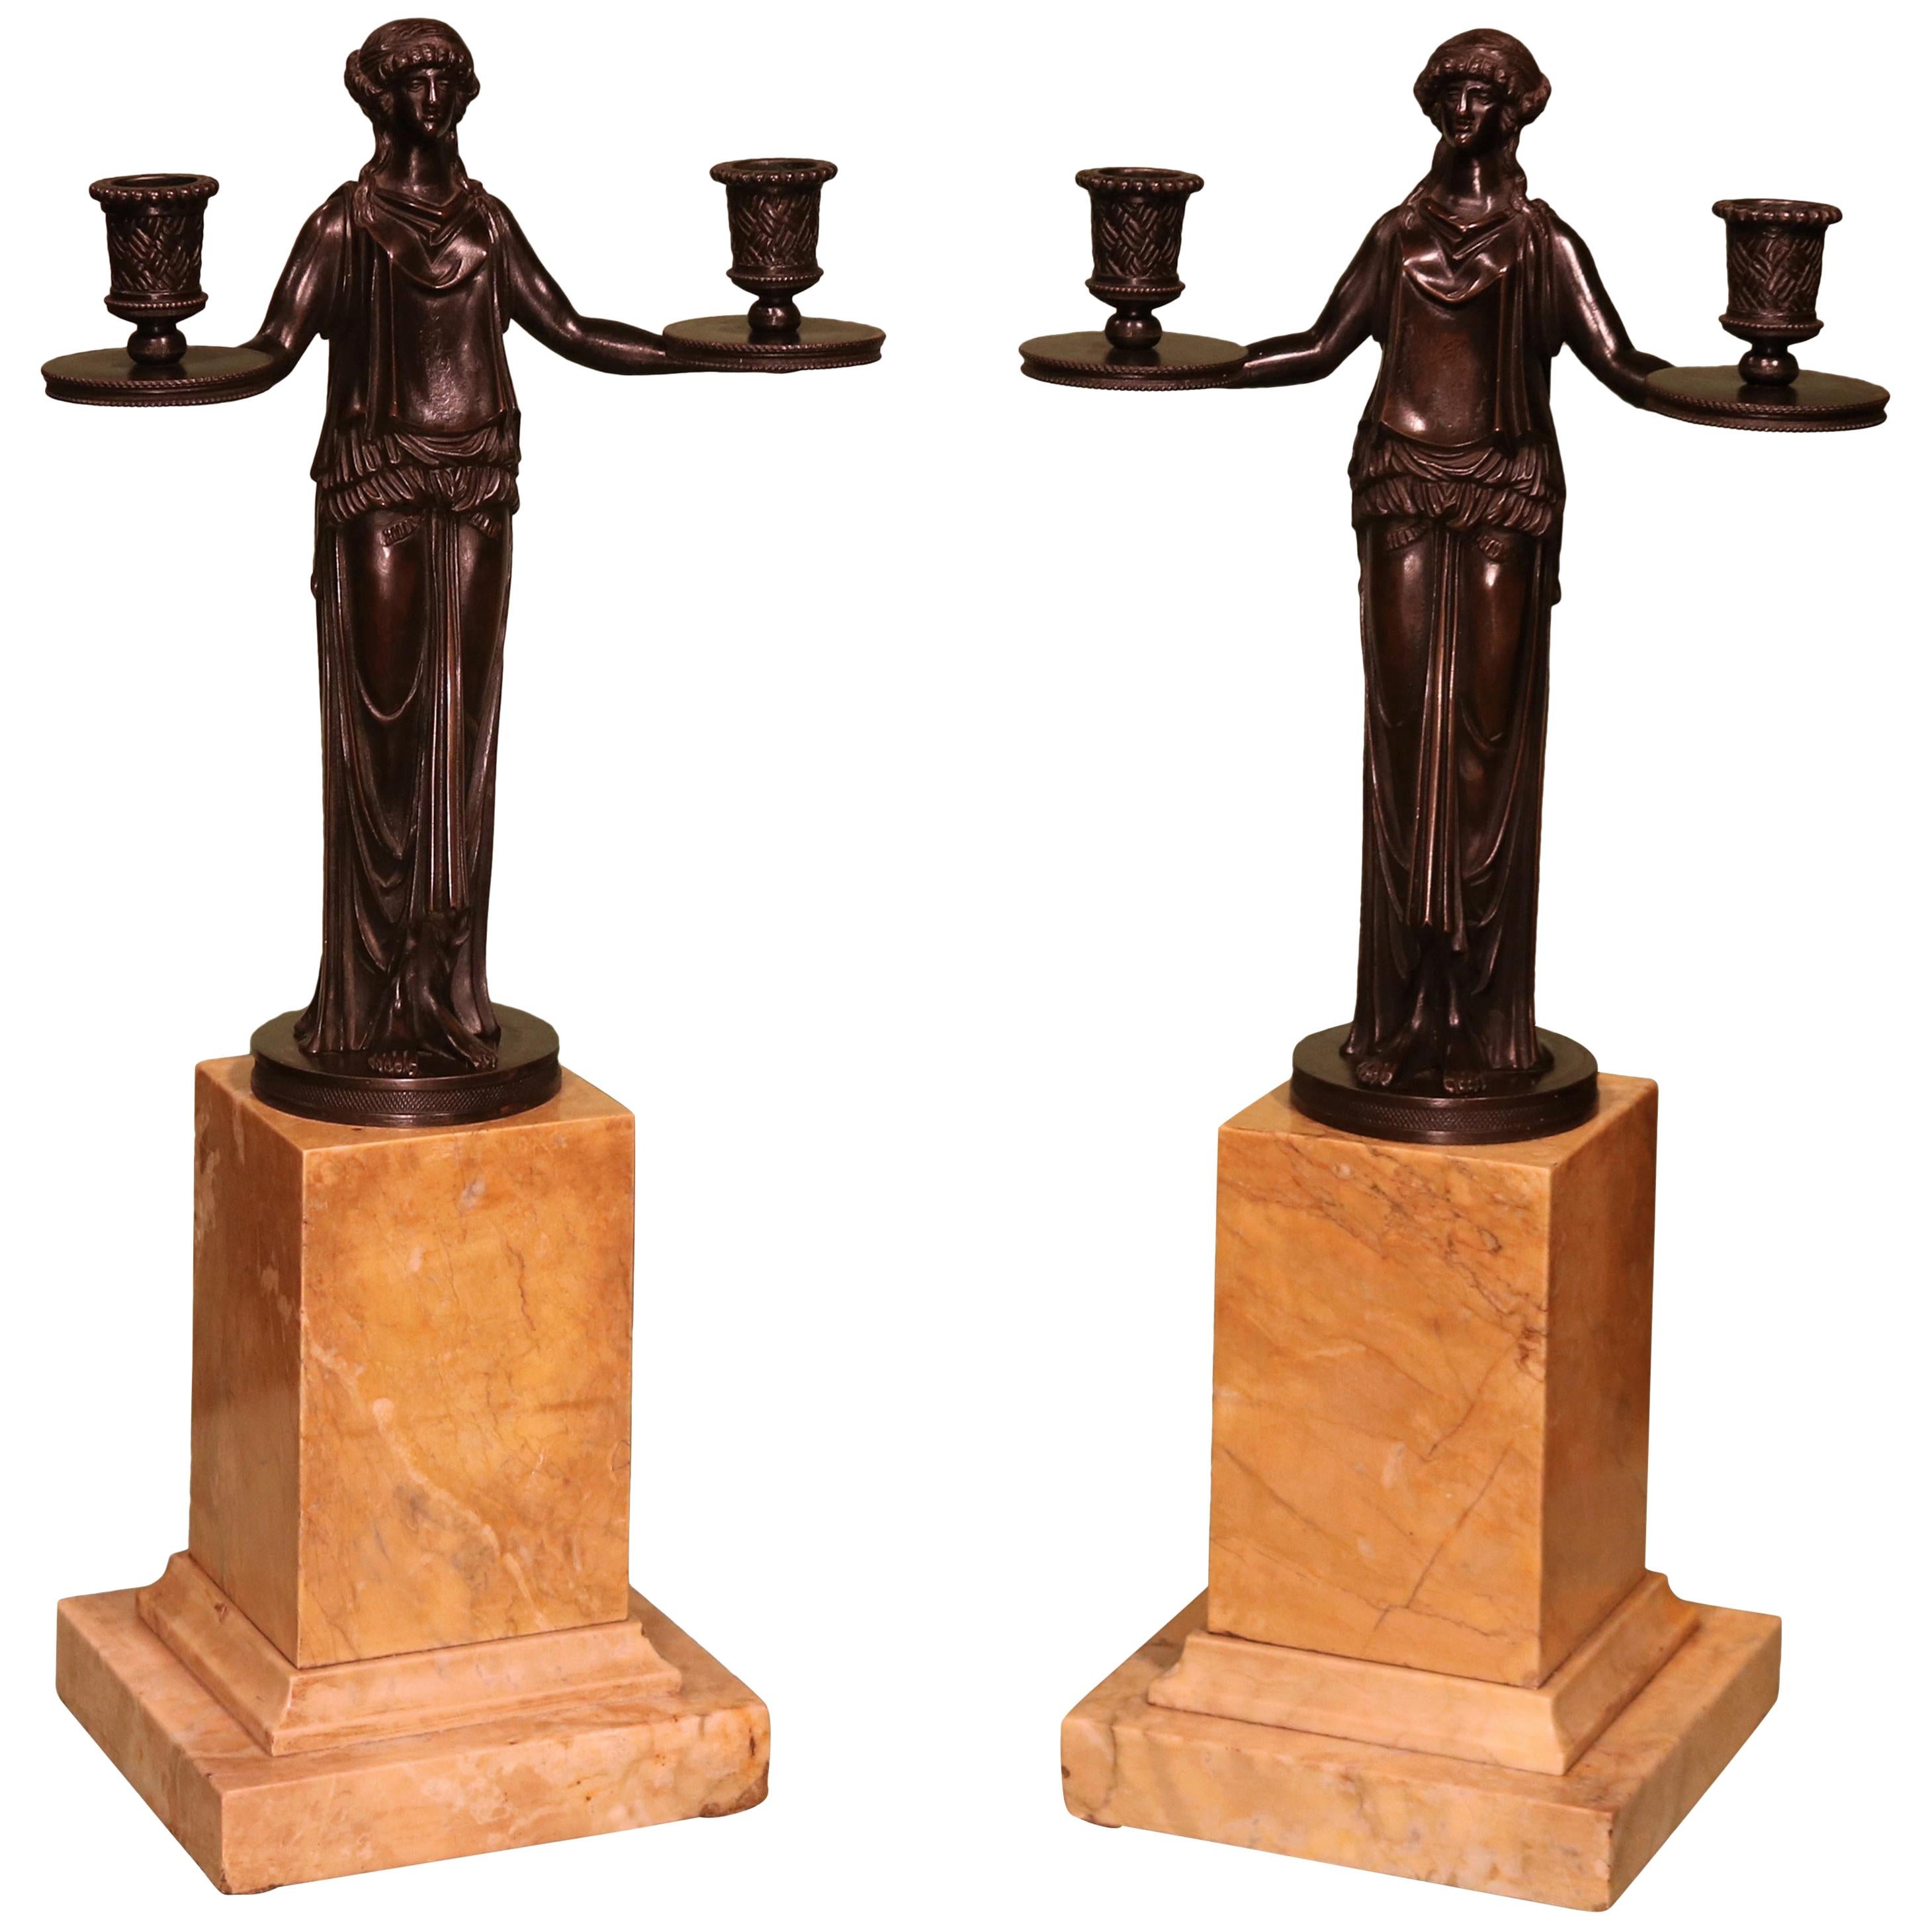 19th Century Two-Light Bronze and Marble Candelabra in the manner of Thomas Hope